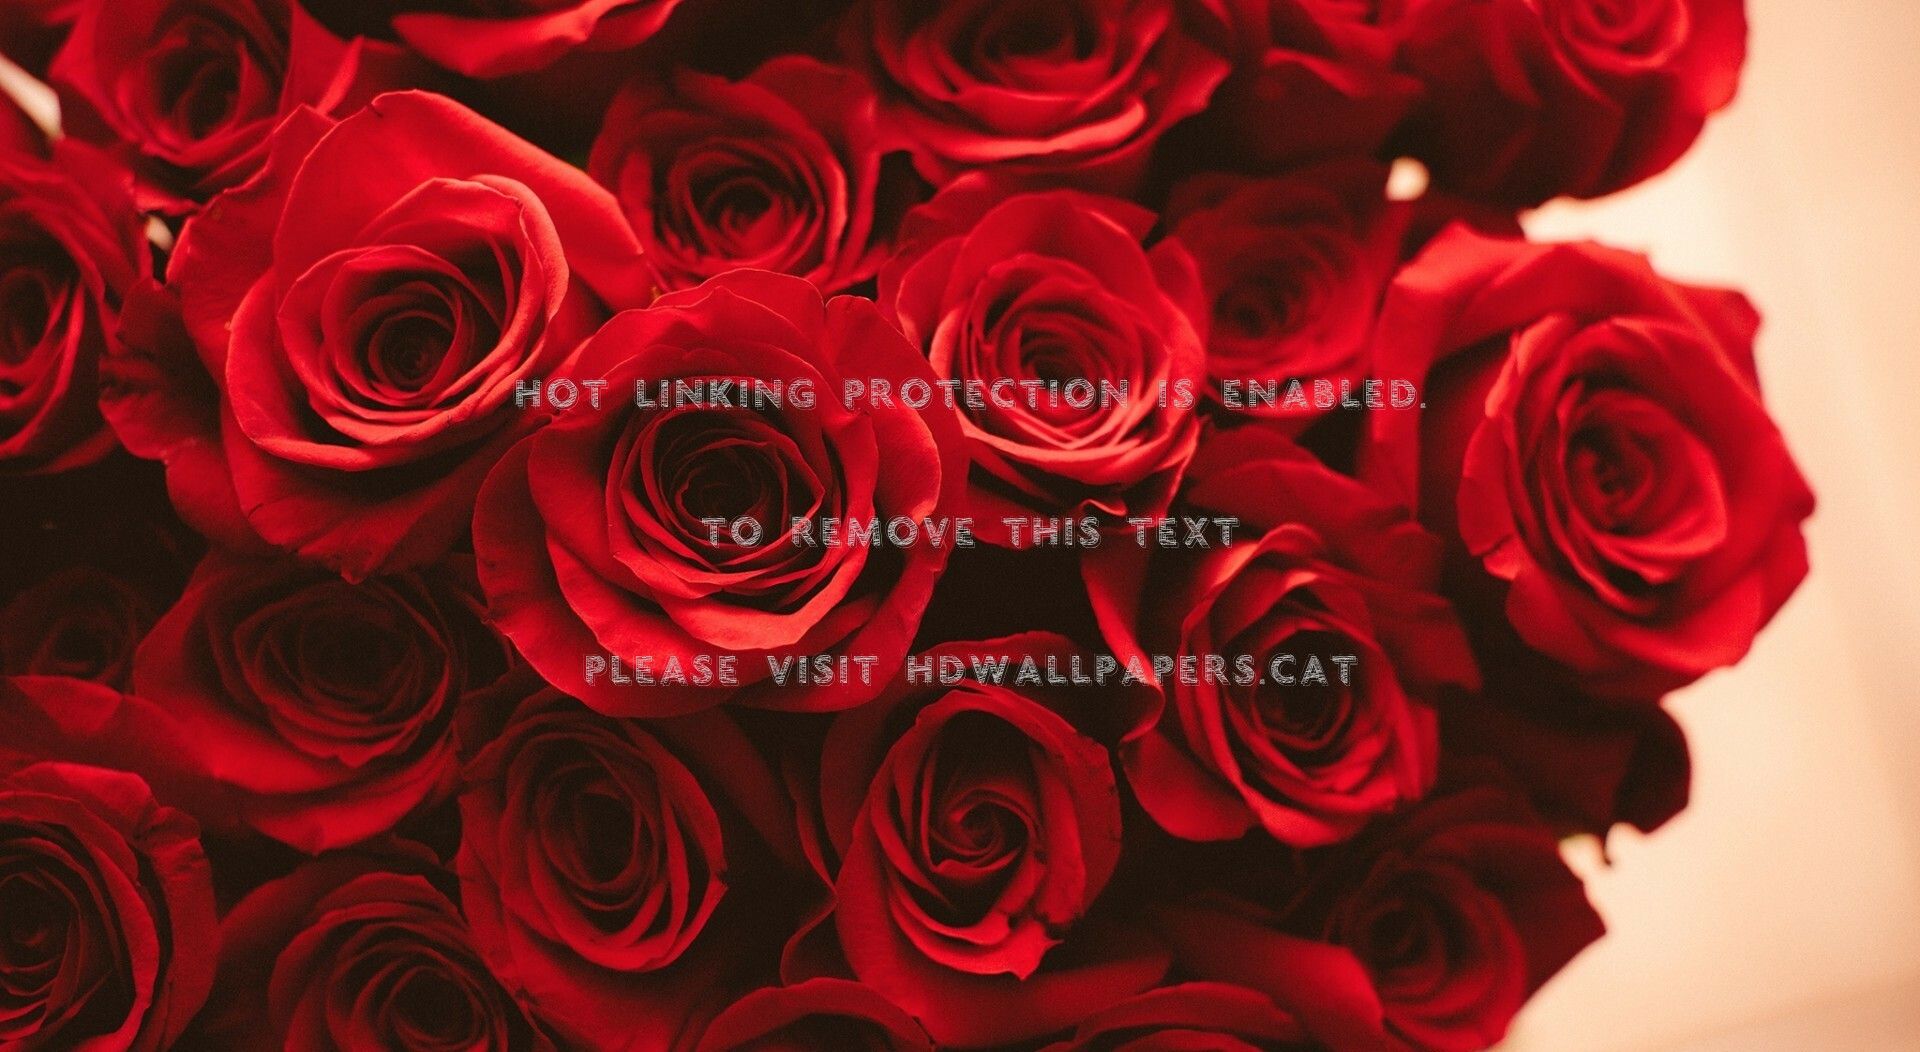 HD wallpaper assortedcolor roses arangement white and red rose bouquet  flower  Wallpaper Flare